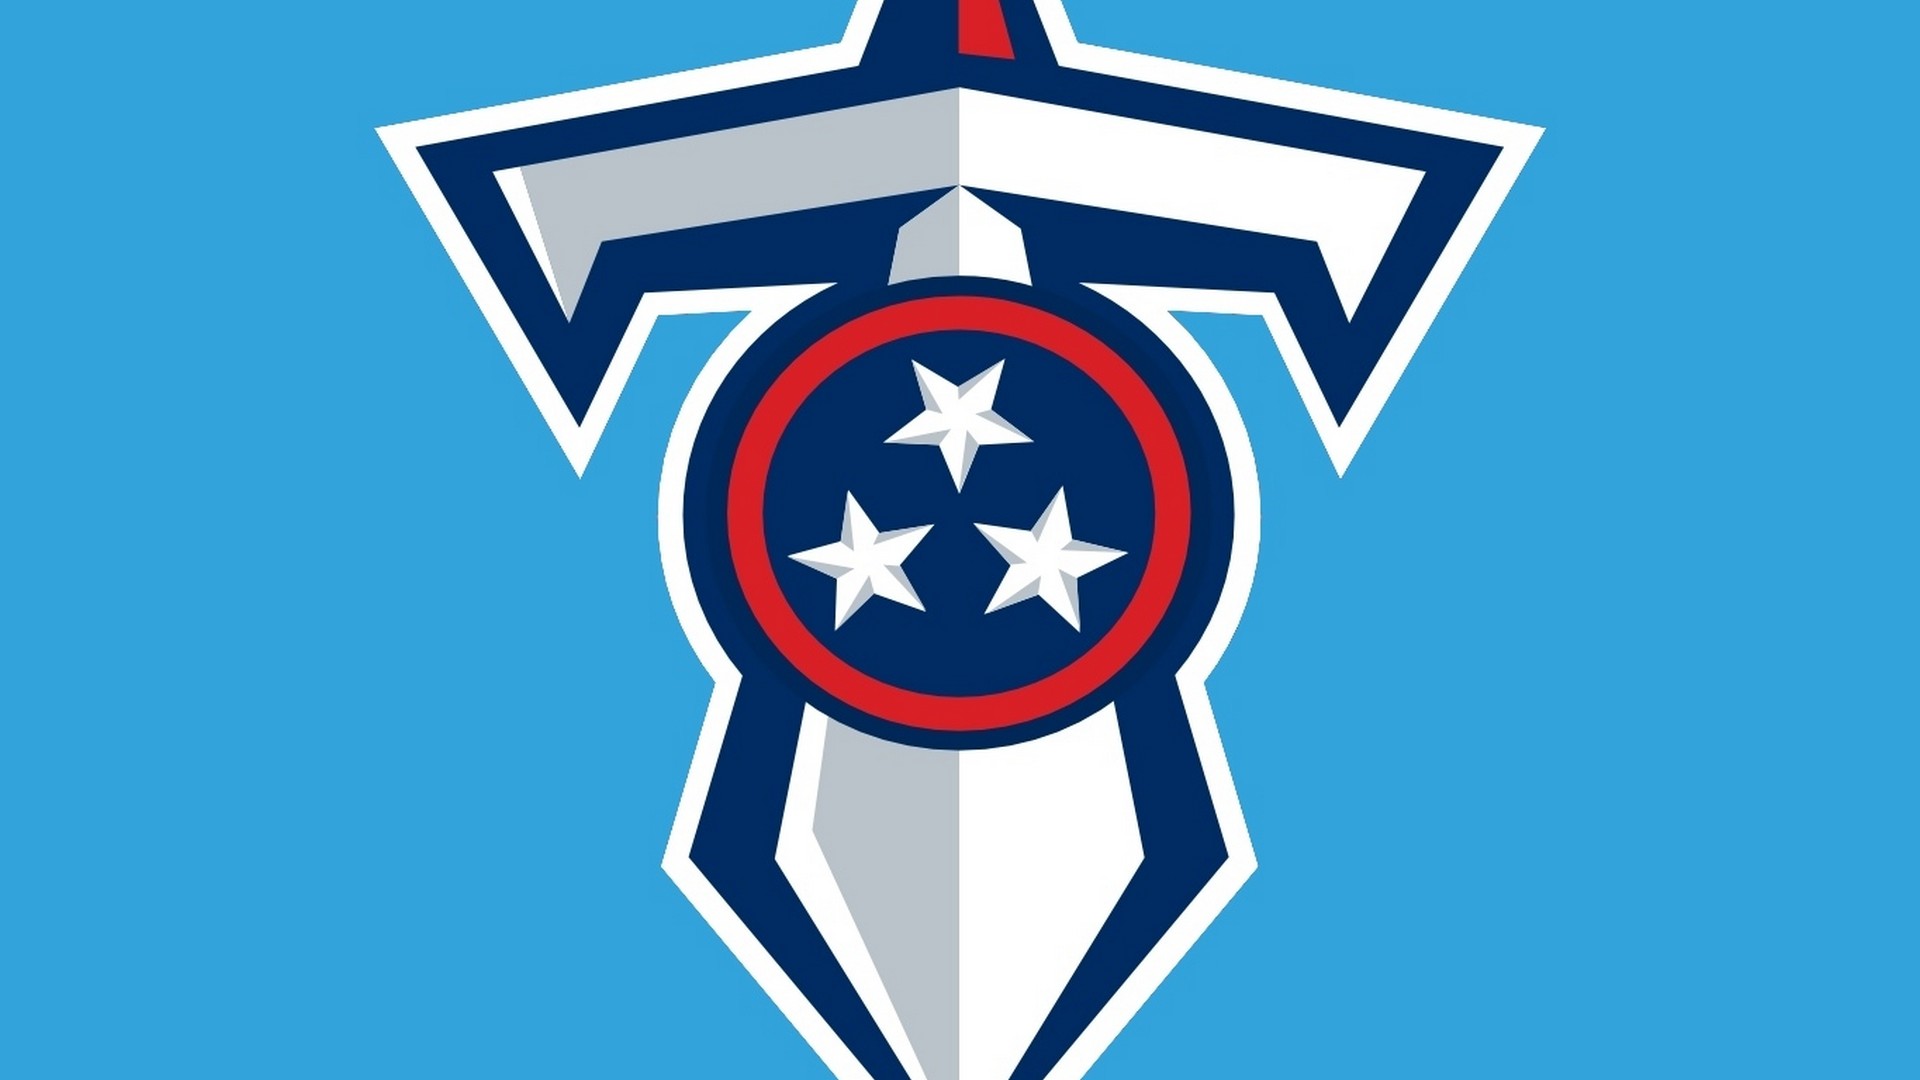 Tennessee Titans For Desktop Wallpaper With High-resolution - Tennessee Titans Alternate Logo - HD Wallpaper 